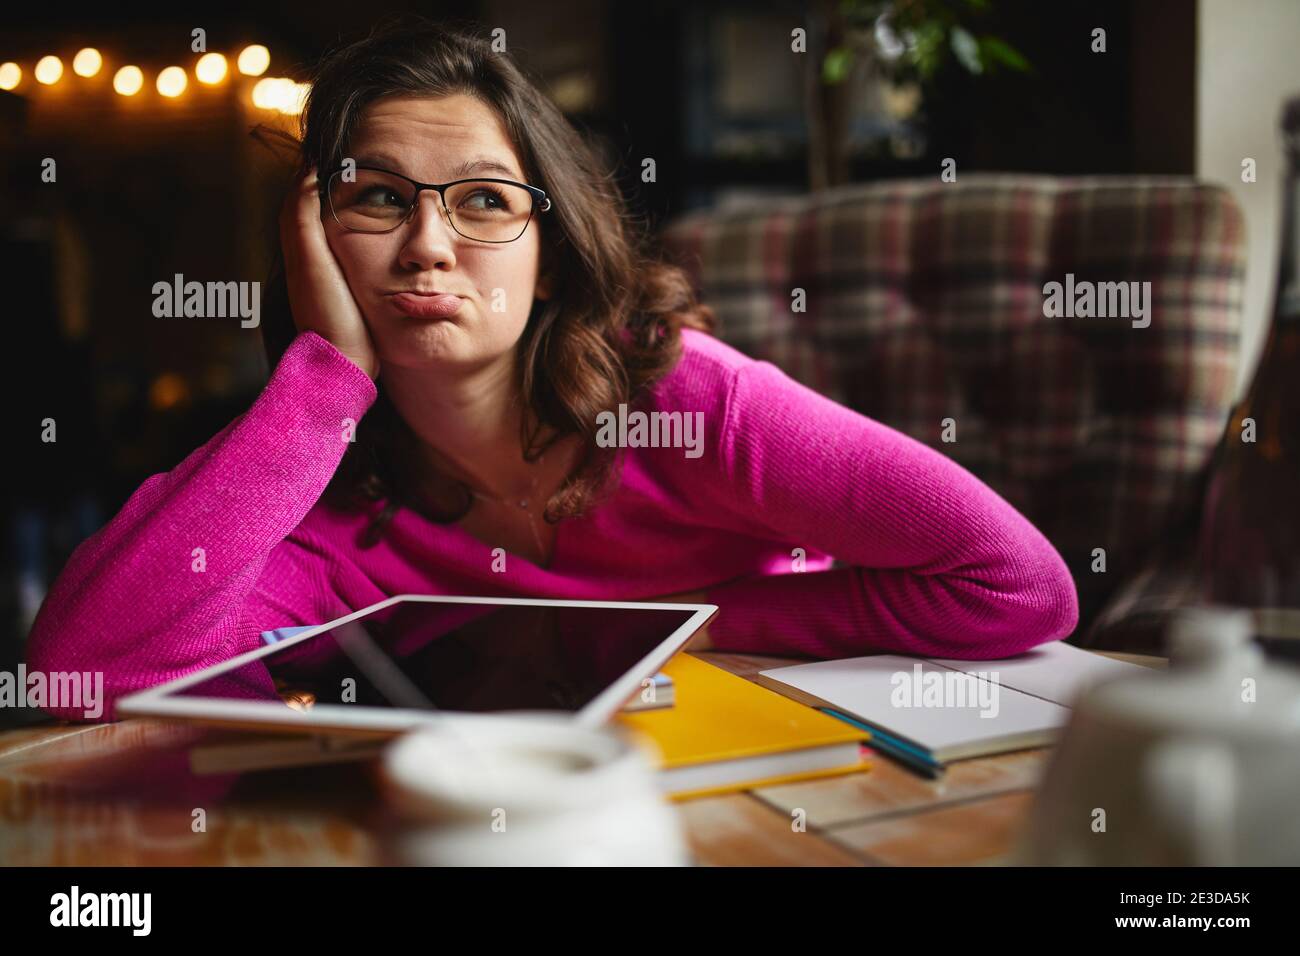 Portrait of young woman working in coffee house while leaning face on hand and making grimace Stock Photo